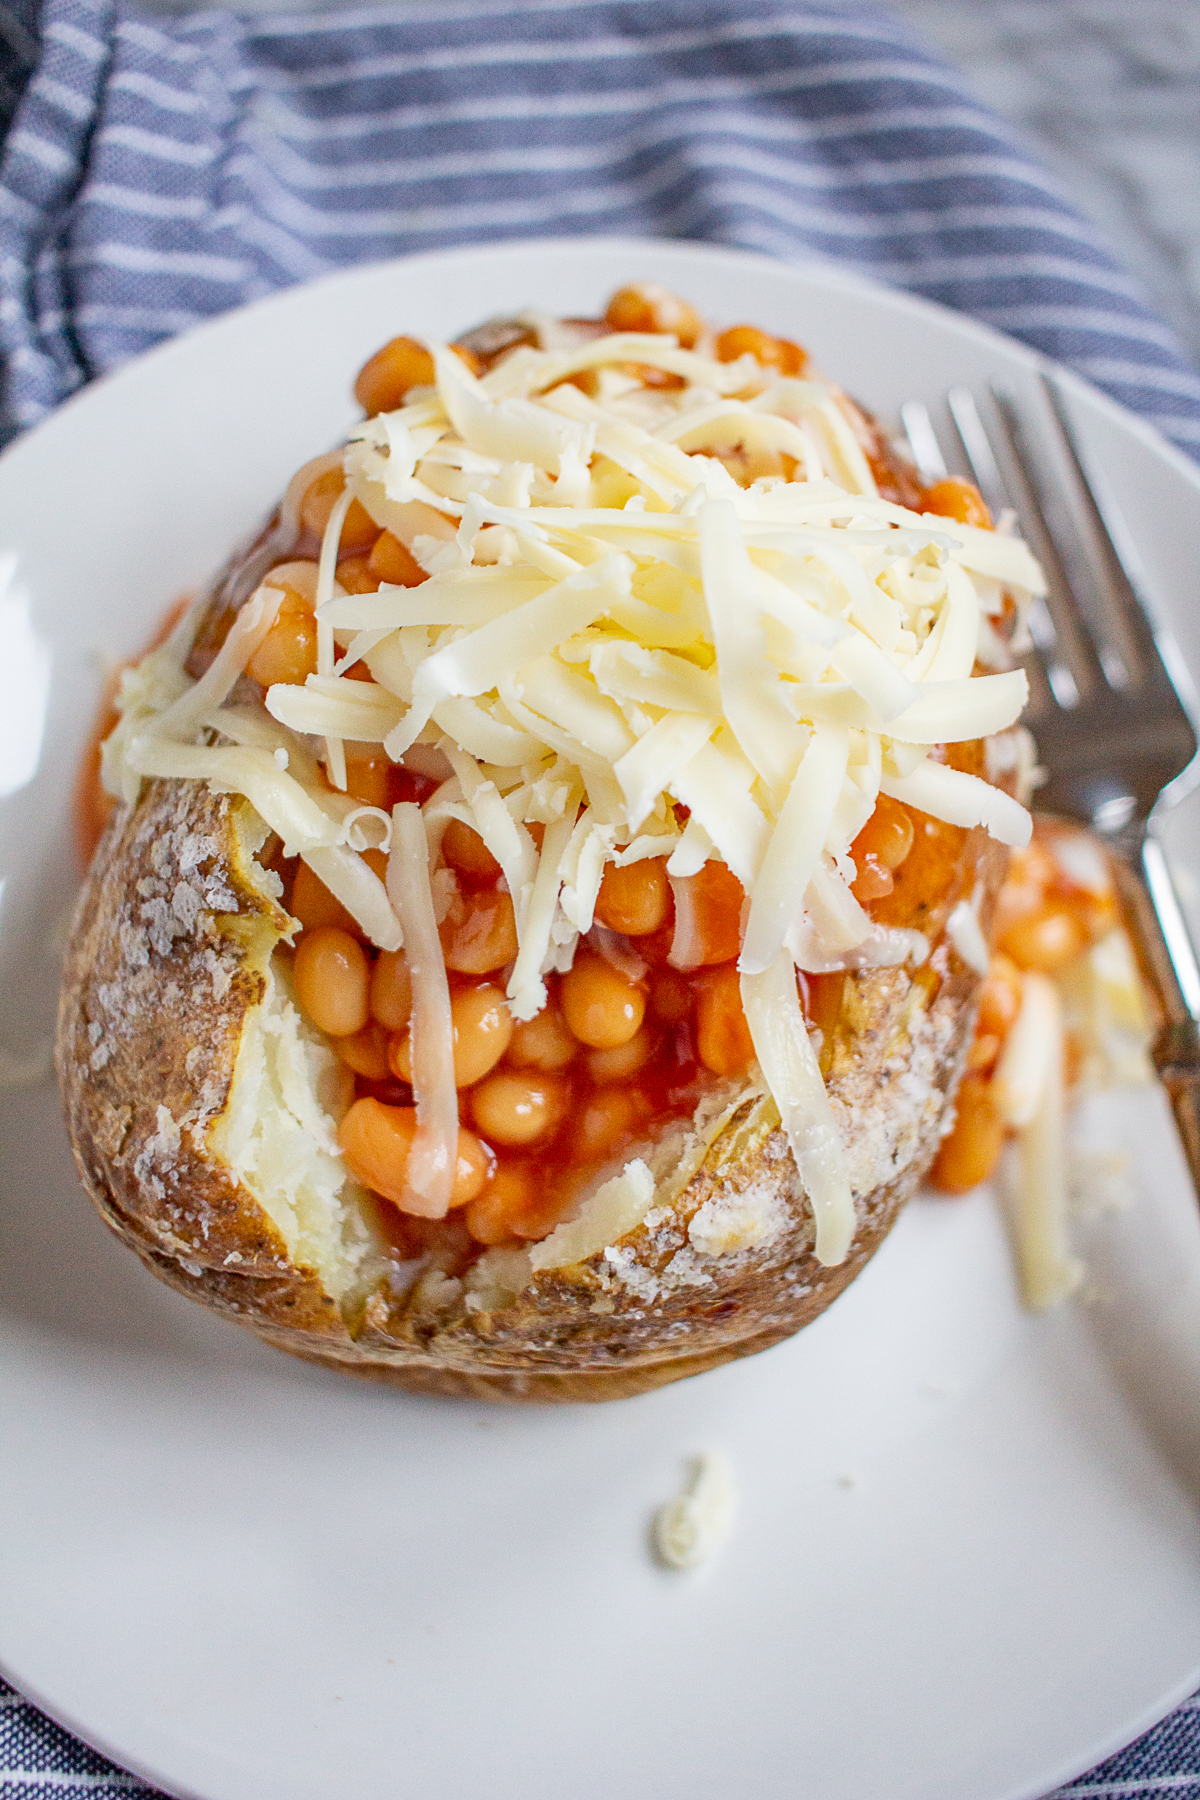 Jacket potatoes with beans